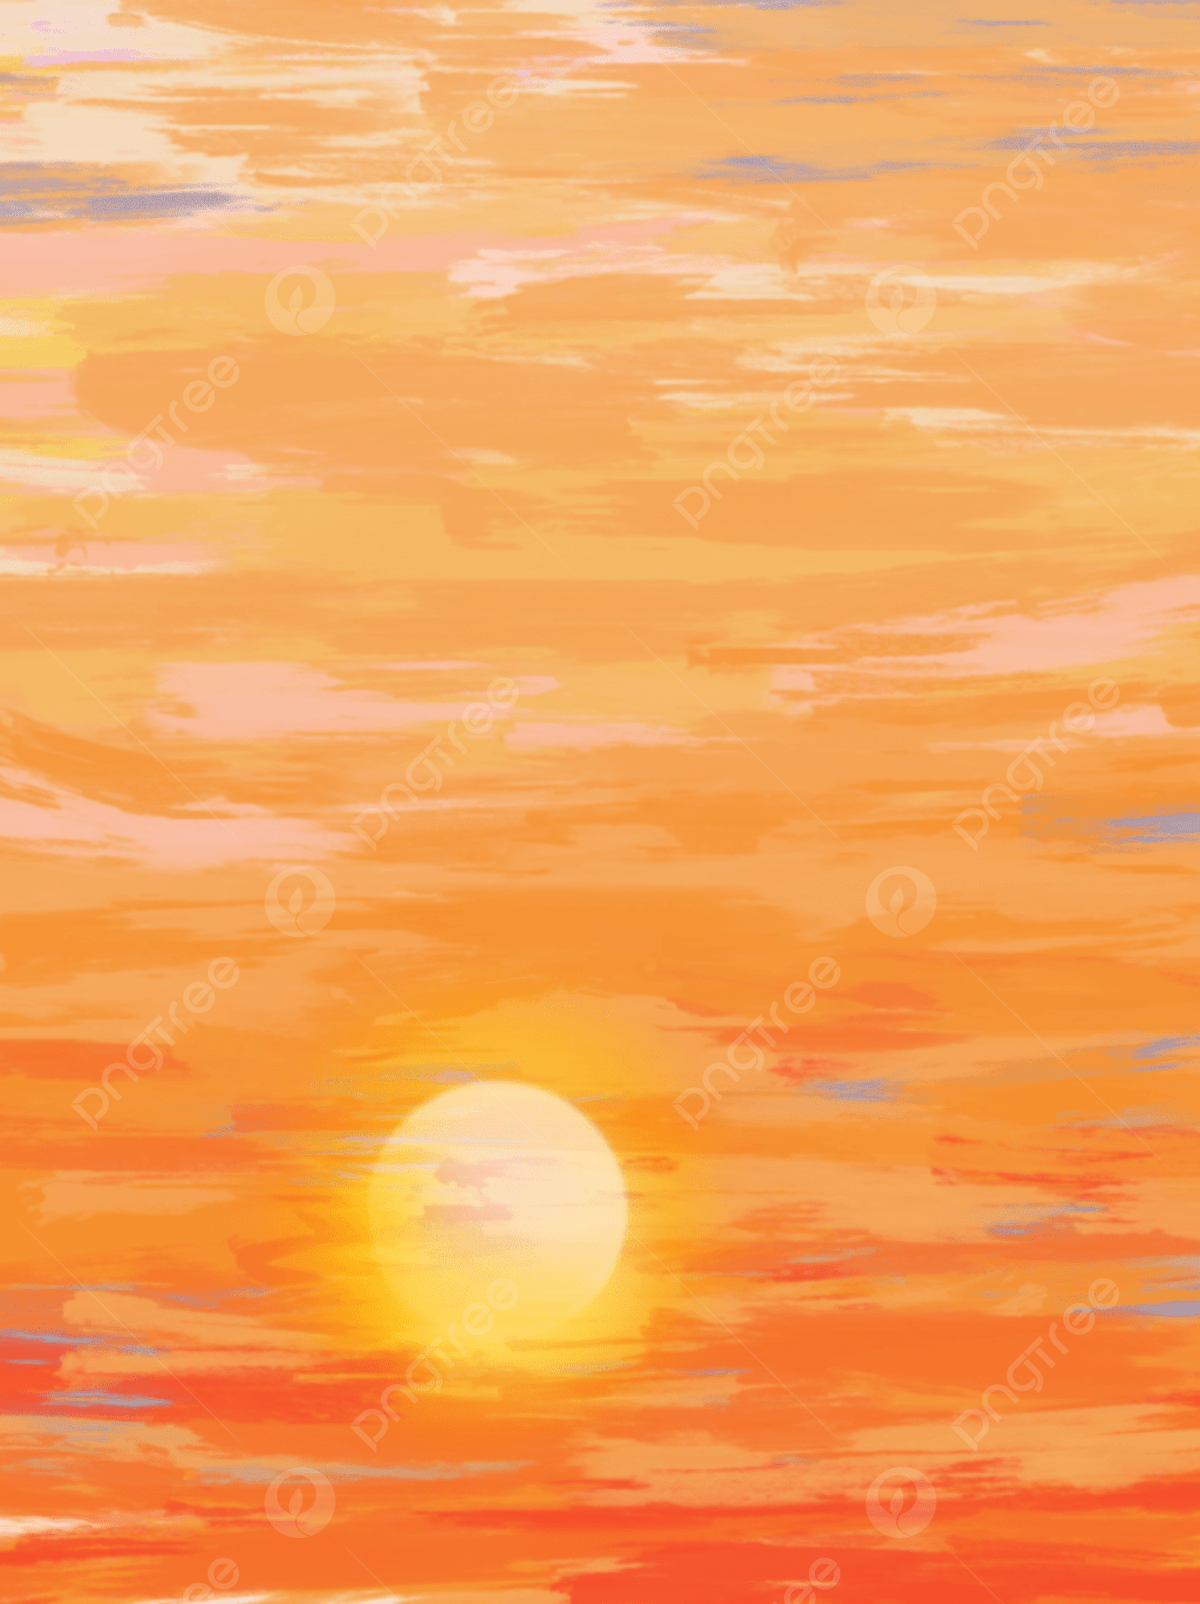 A painting of a sun setting in a cloudy sky - Pastel orange